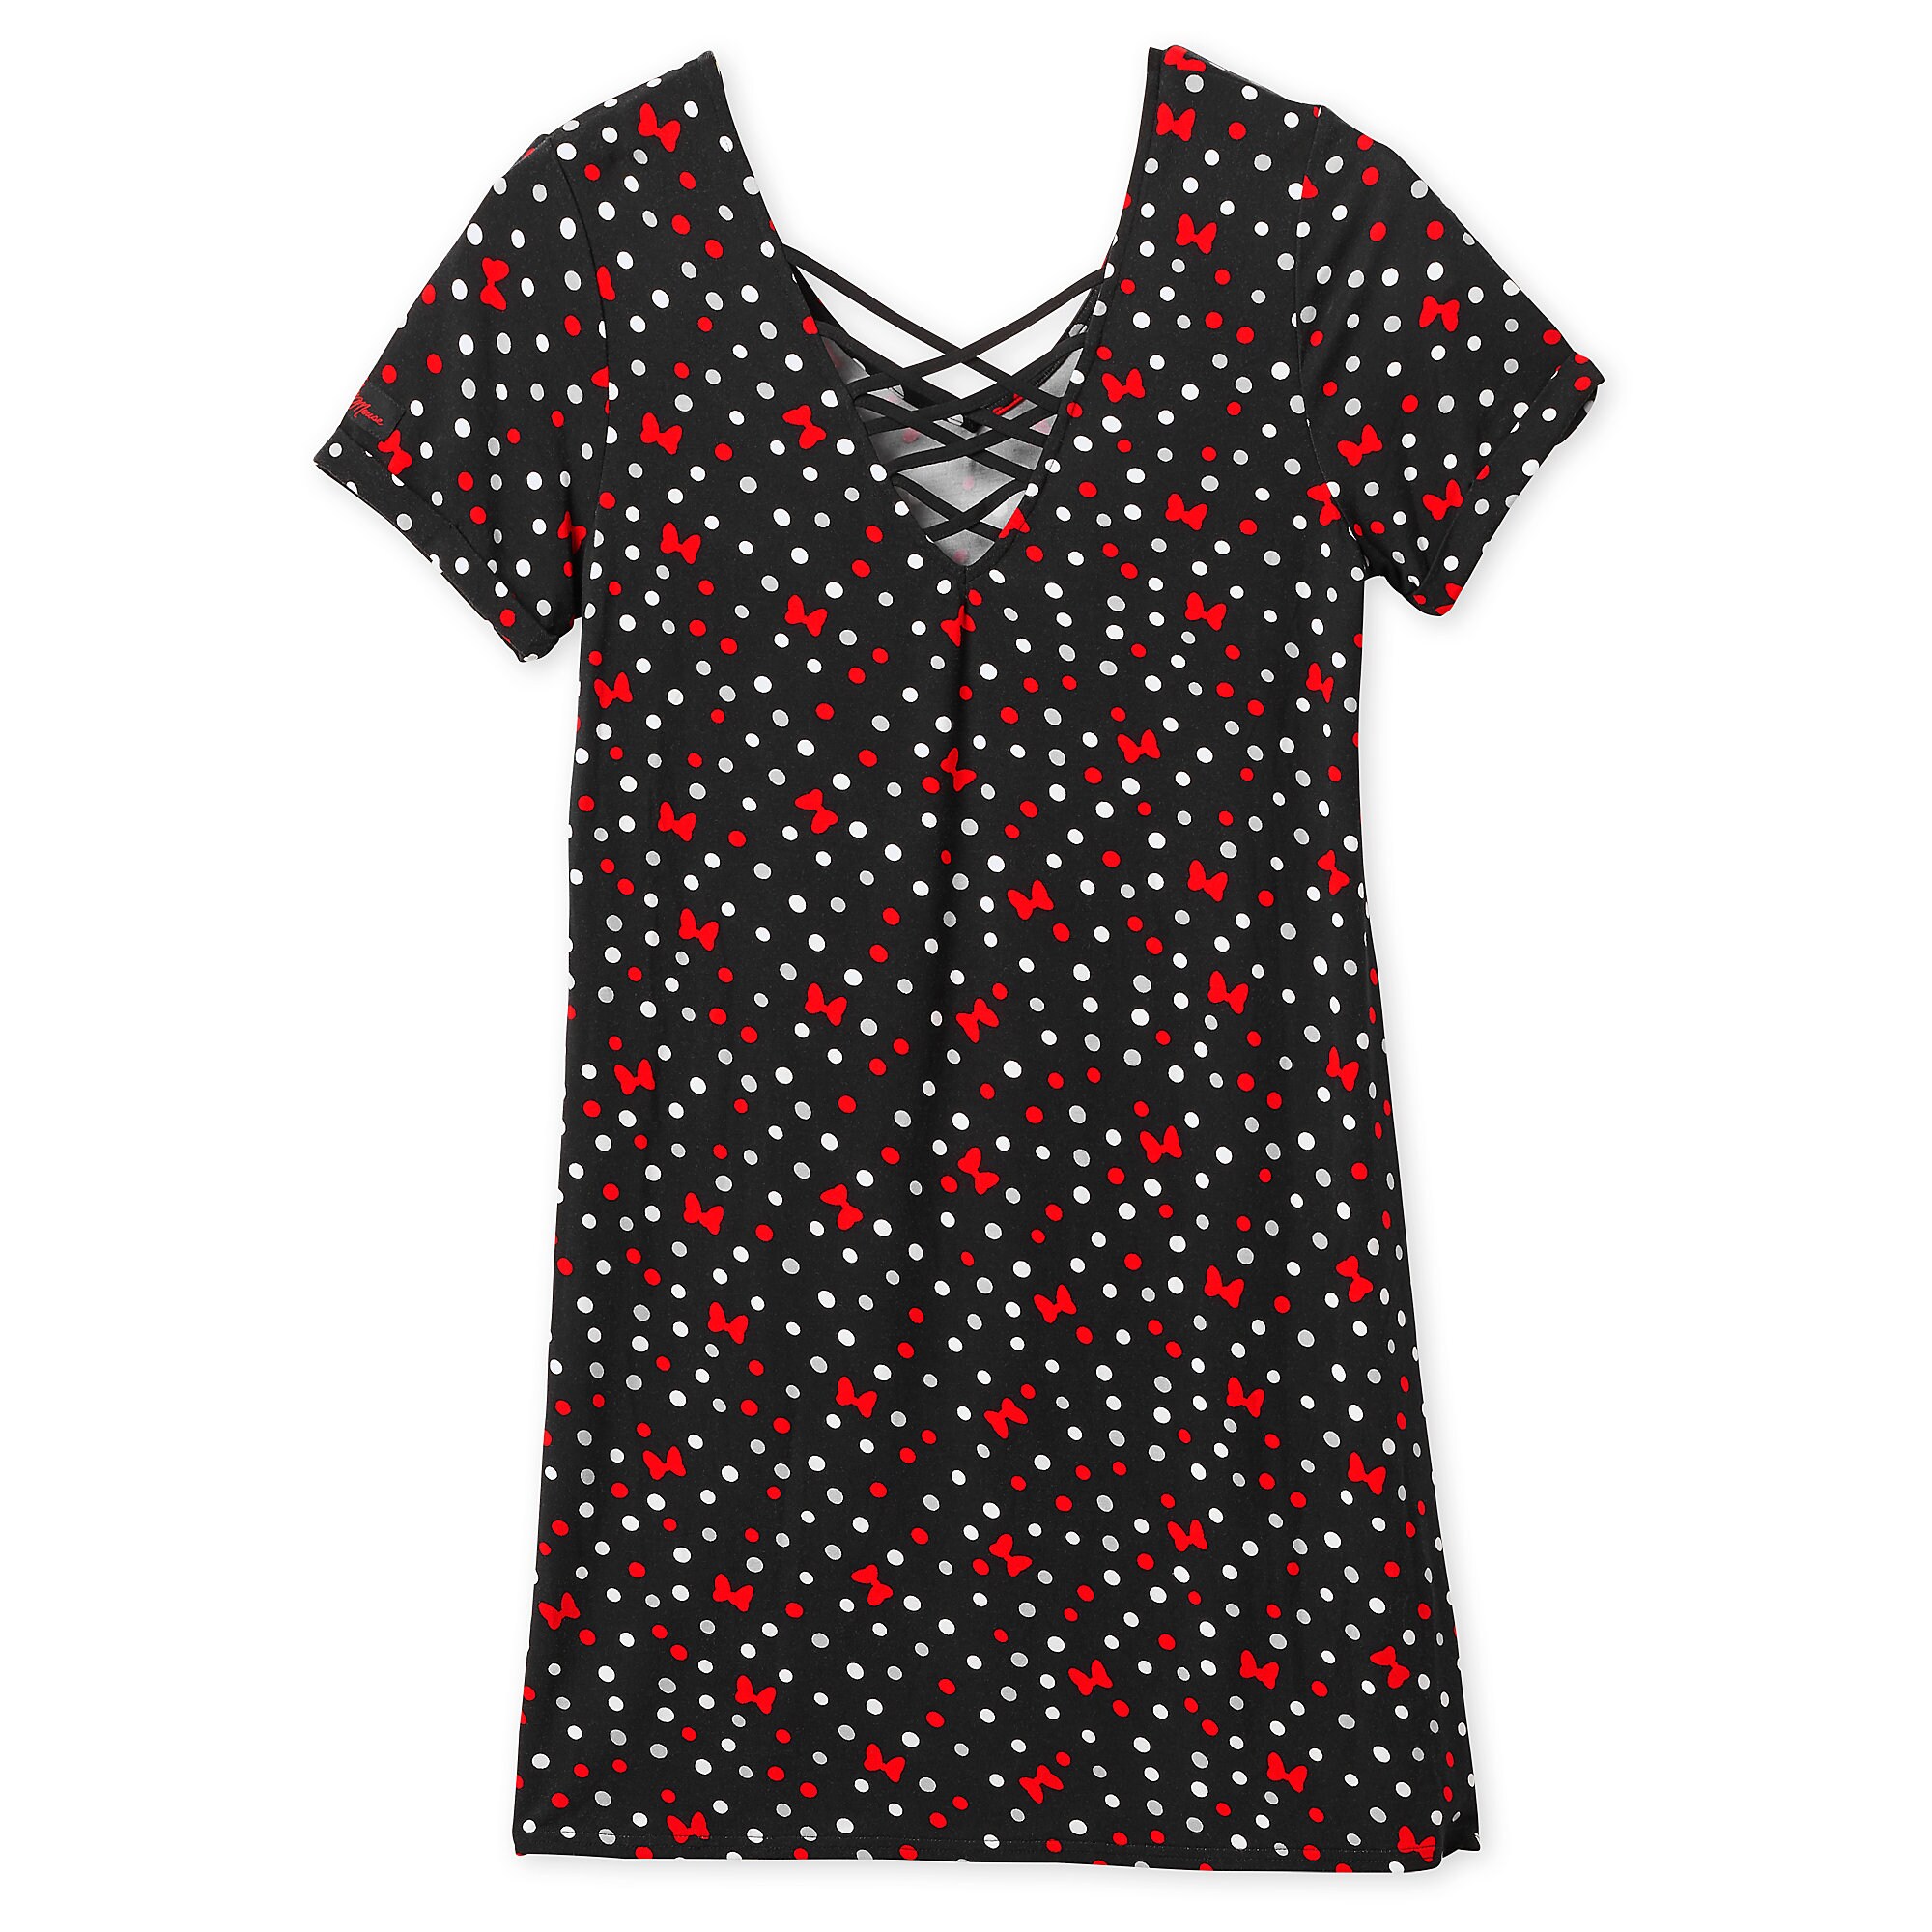 Minnie Mouse Dress for Women